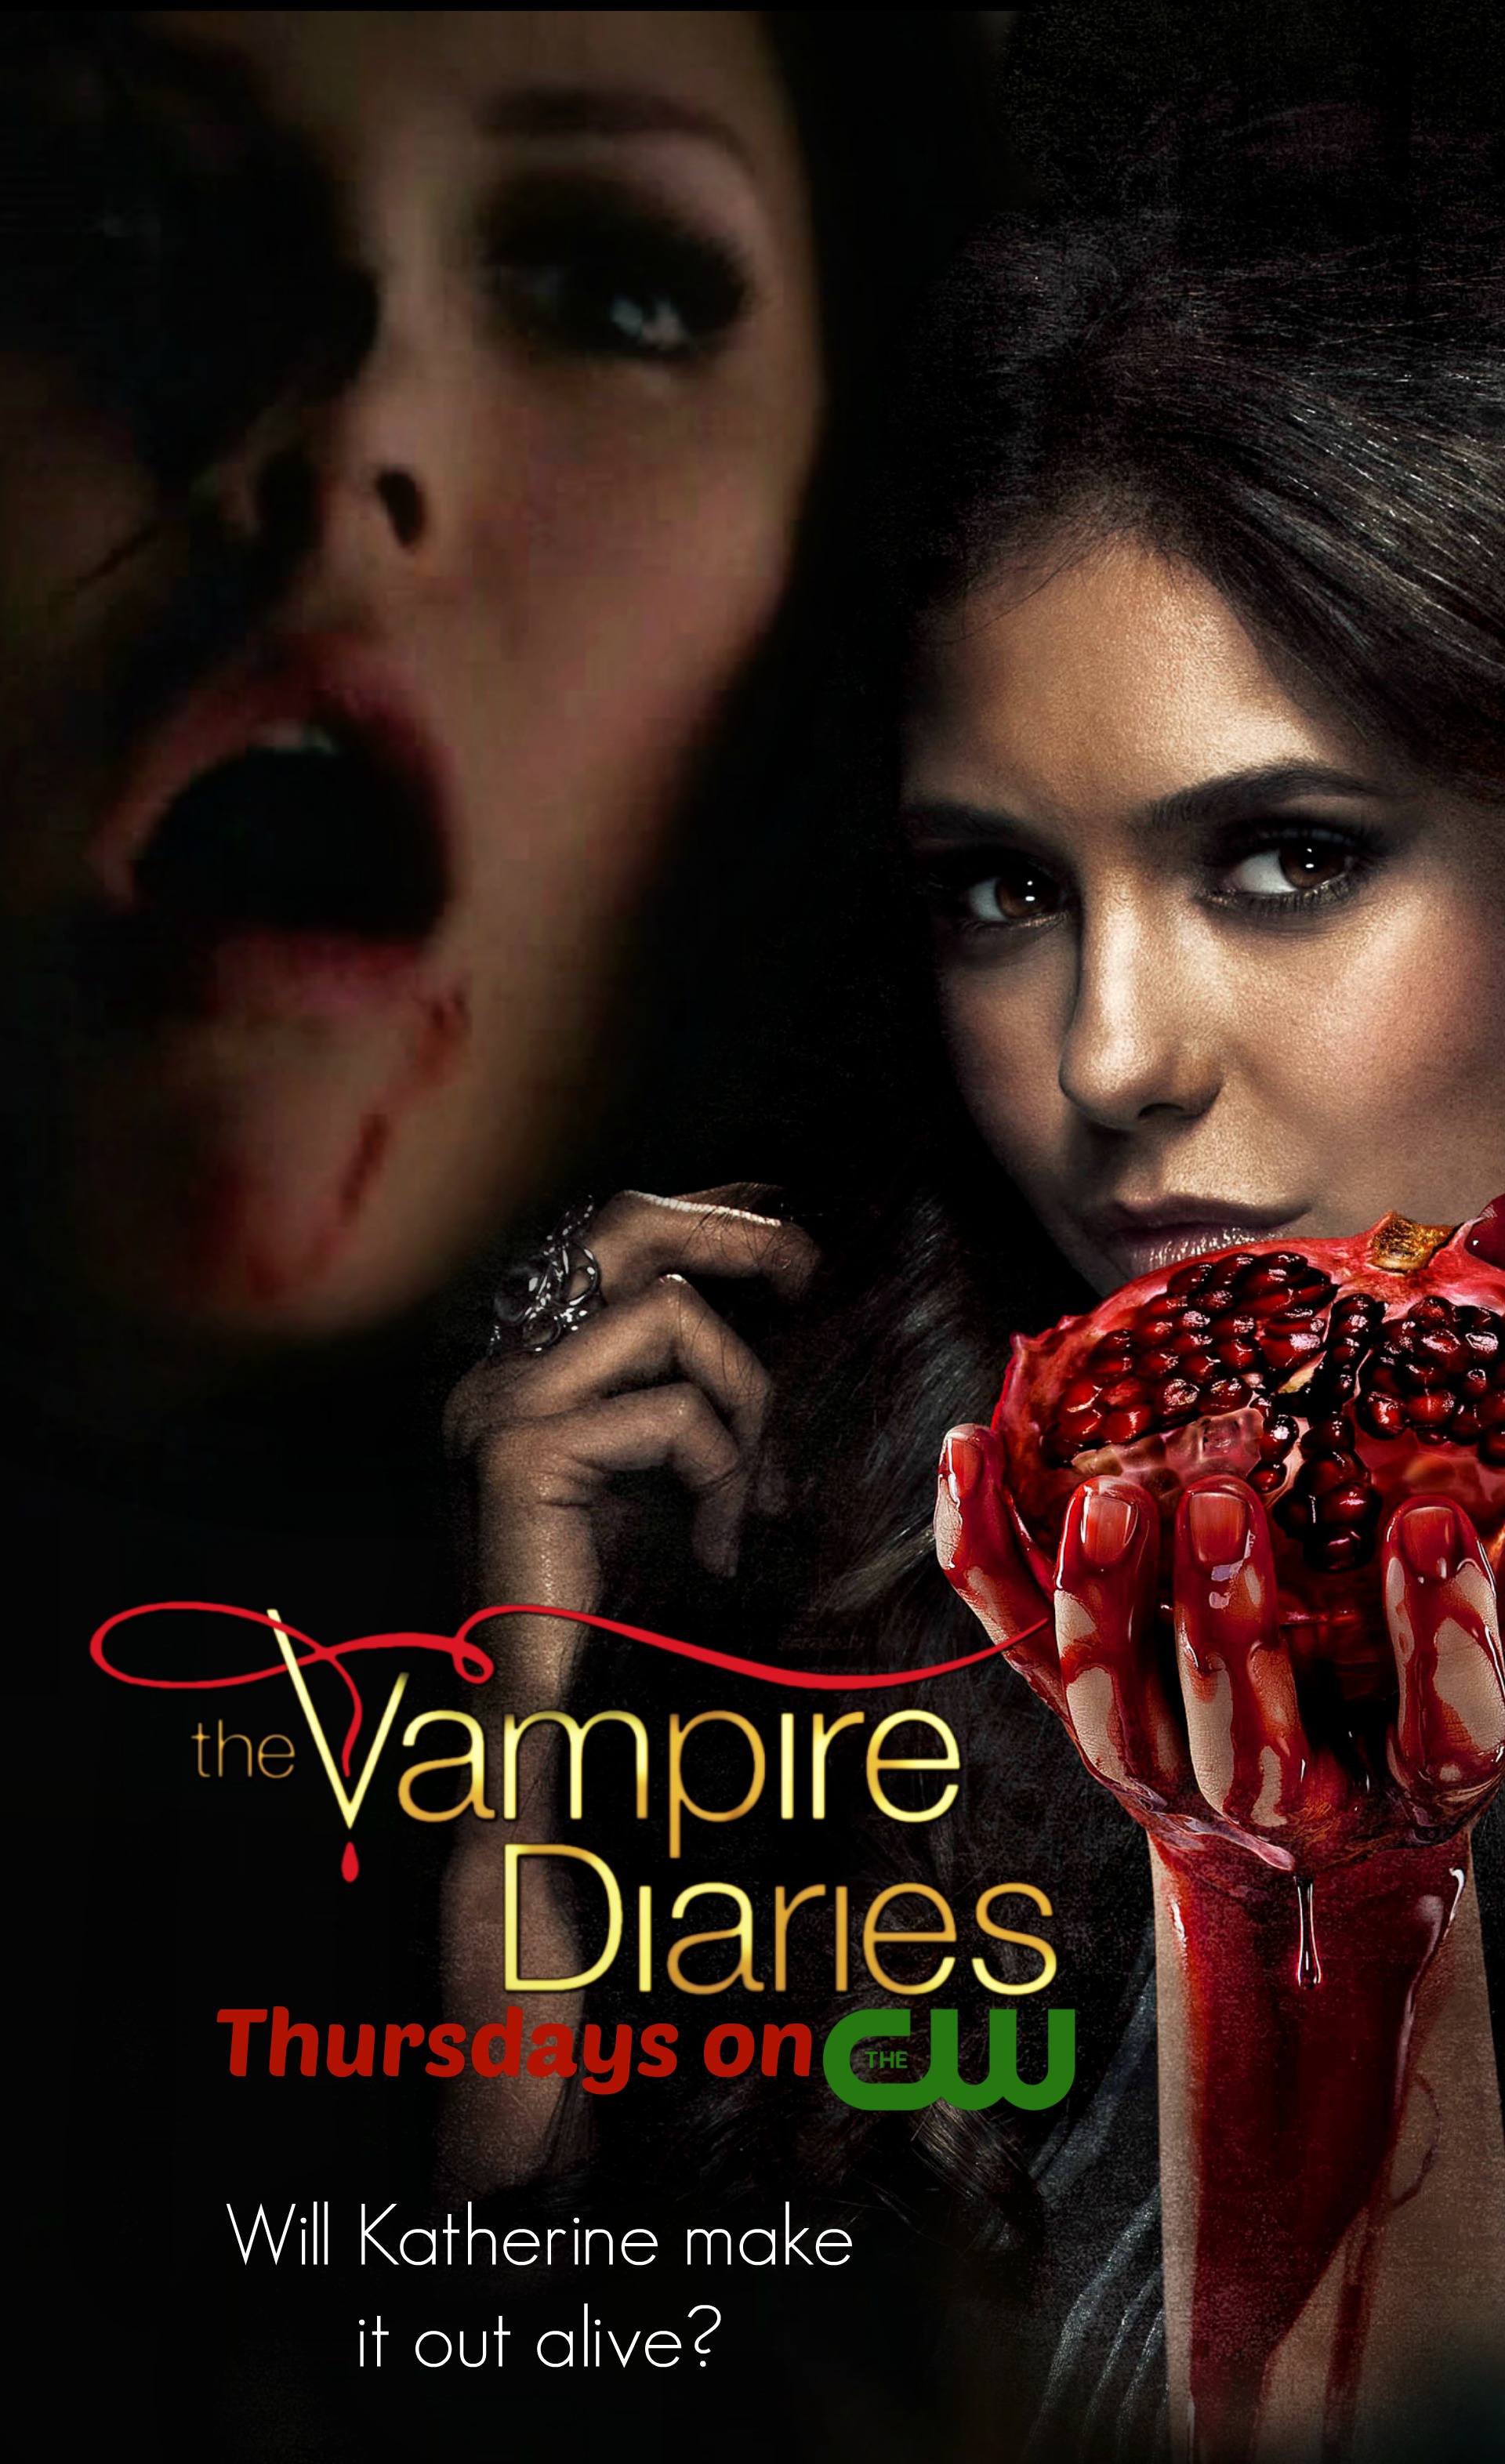 Undead And Alive Thevampirediariesfanfictionpage Wiki Fandom Powered By Wikia